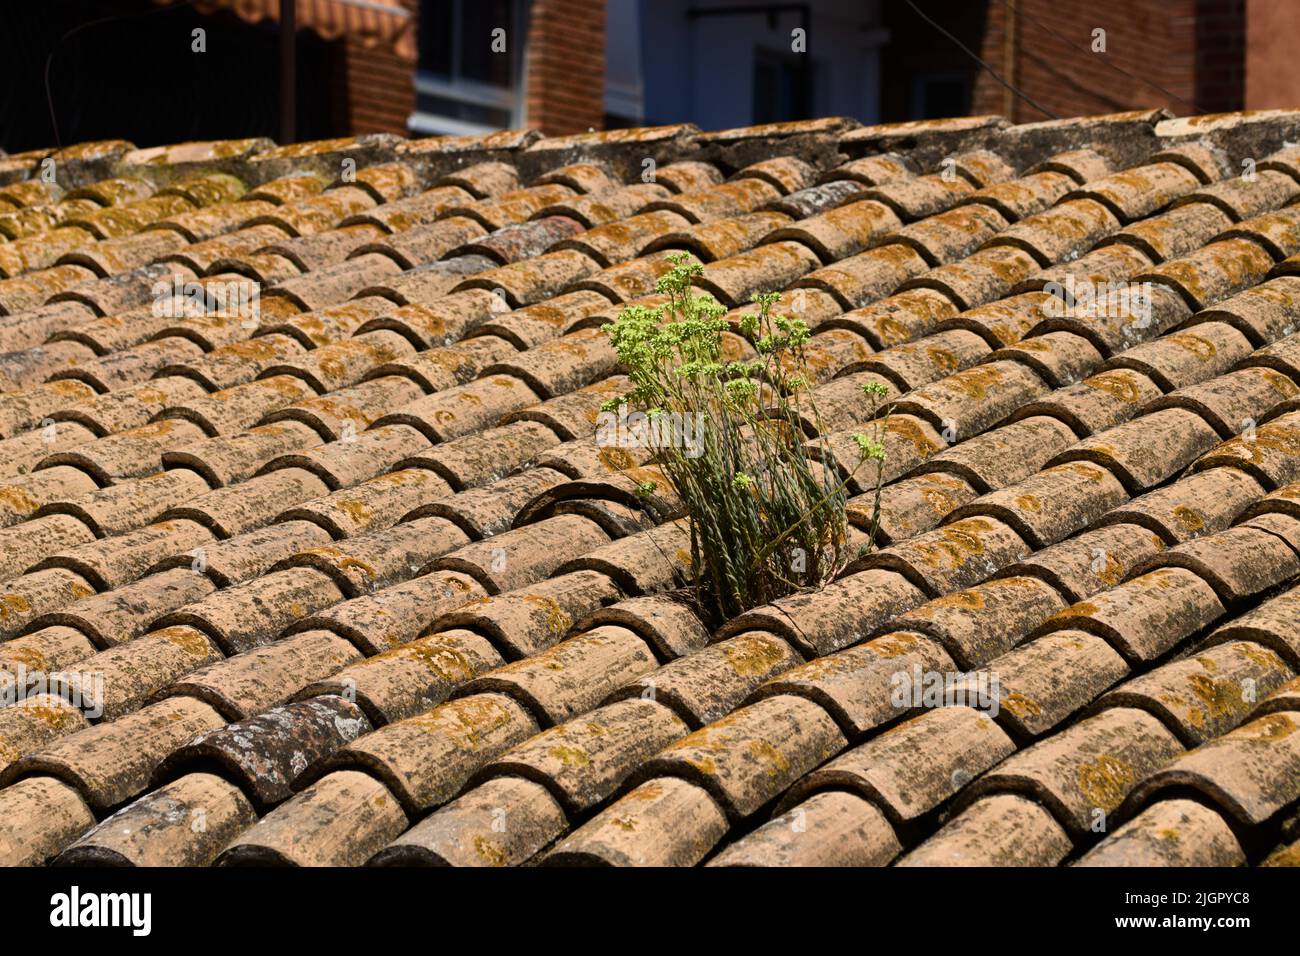 Image of a traditional tiled roof in which there is a plant of the type Sedum sediforme (shepherd's raim) Stock Photo